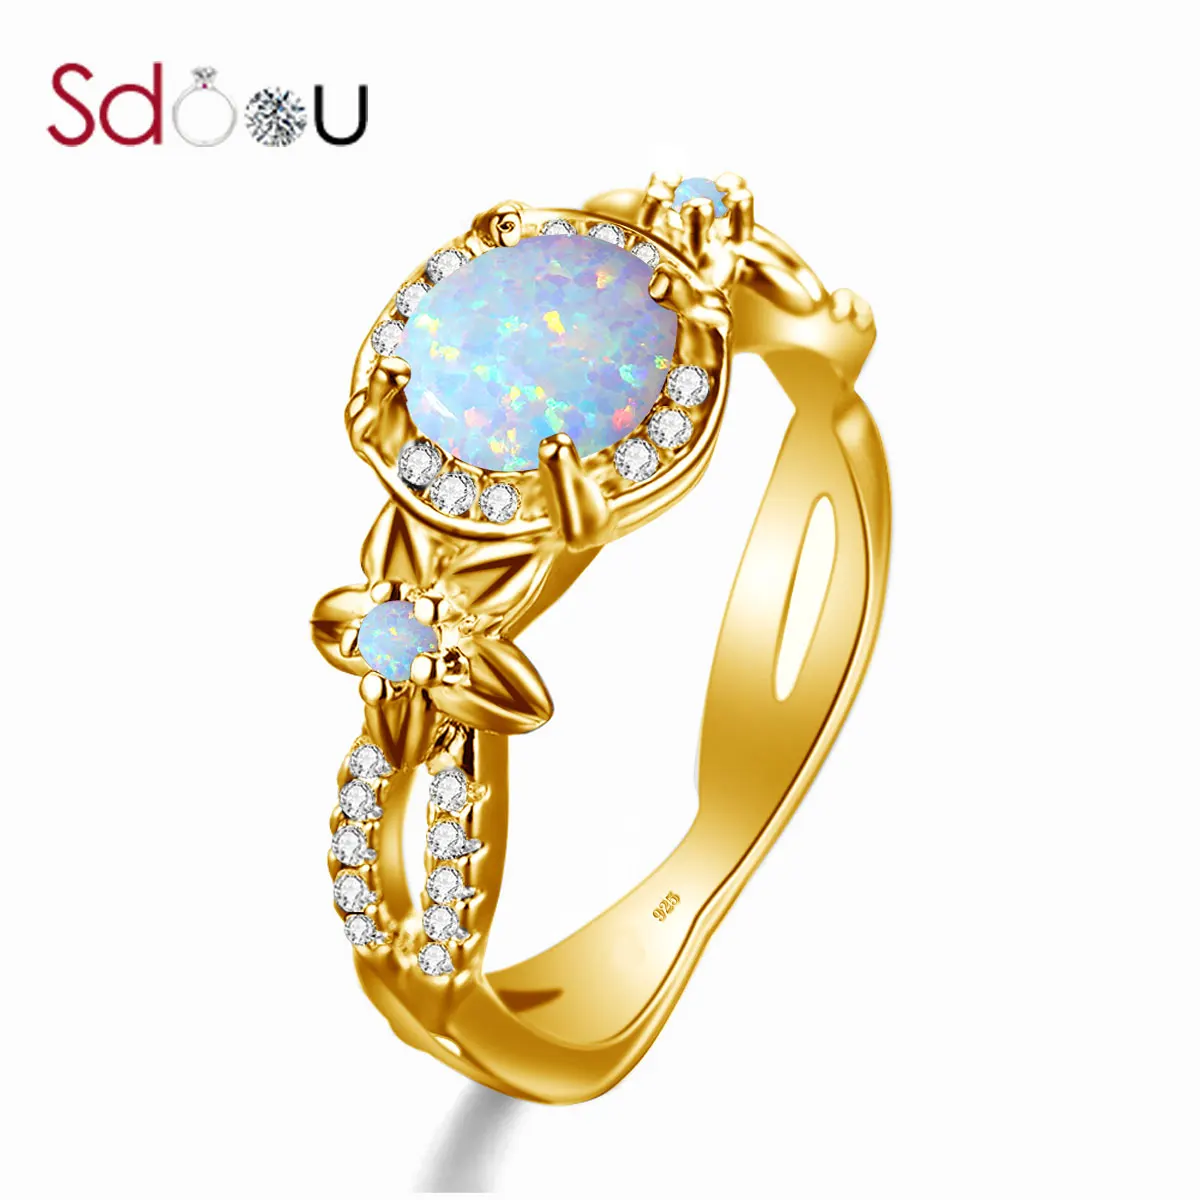 

SDOOU 925 Sterling Silver Ring For Women Undefined Gemstones Opal Rings Round Cut Diamond With Flower Bohemia 14K Gold Jewelry